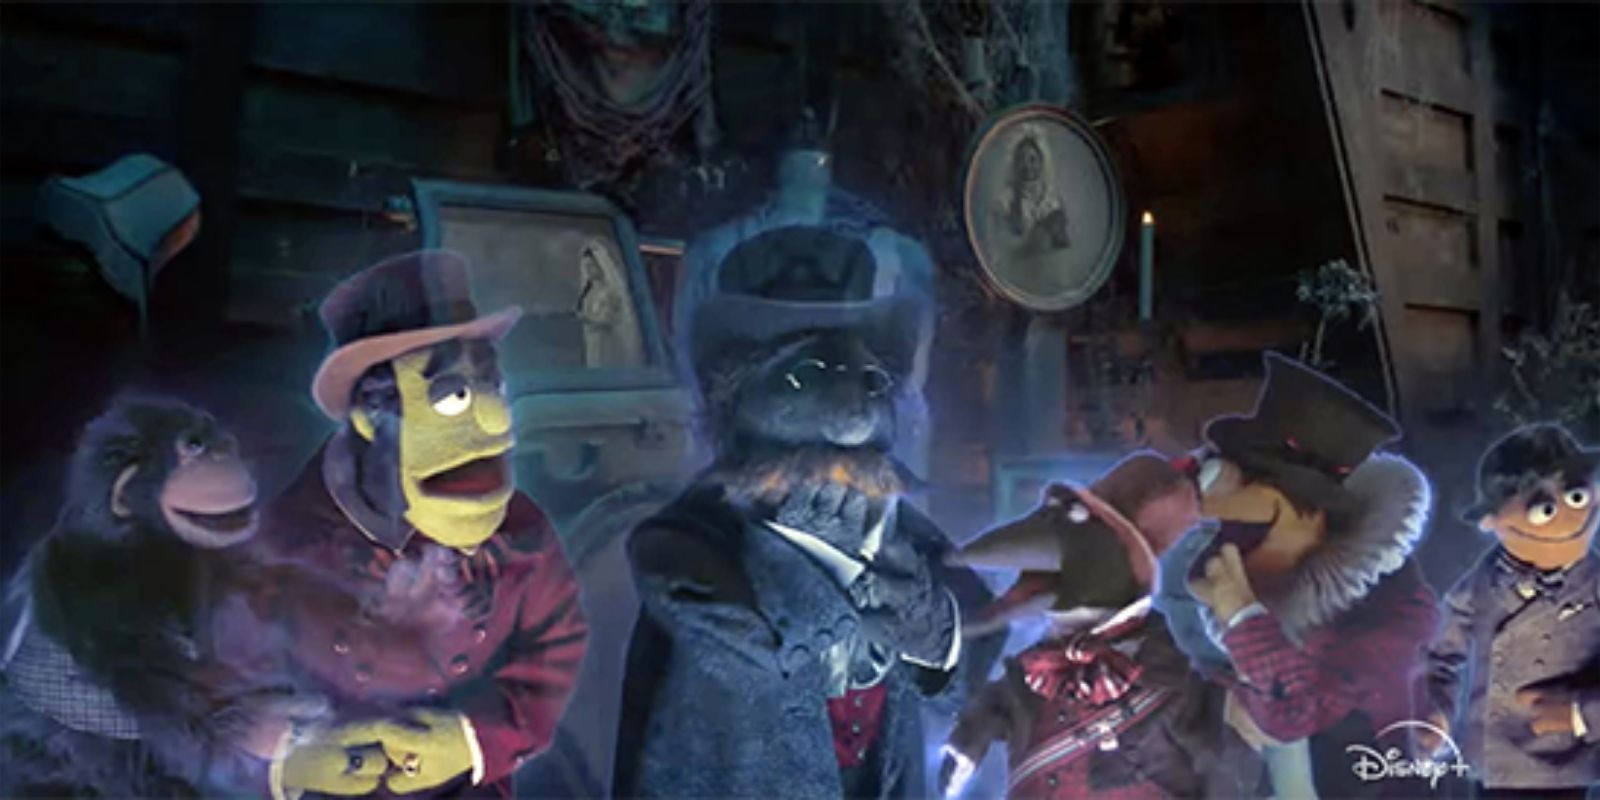 The ghosts of Sal Minella, Johnny Fiama, a penguin, and other Muppets argue in Muppets Haunted Mansion